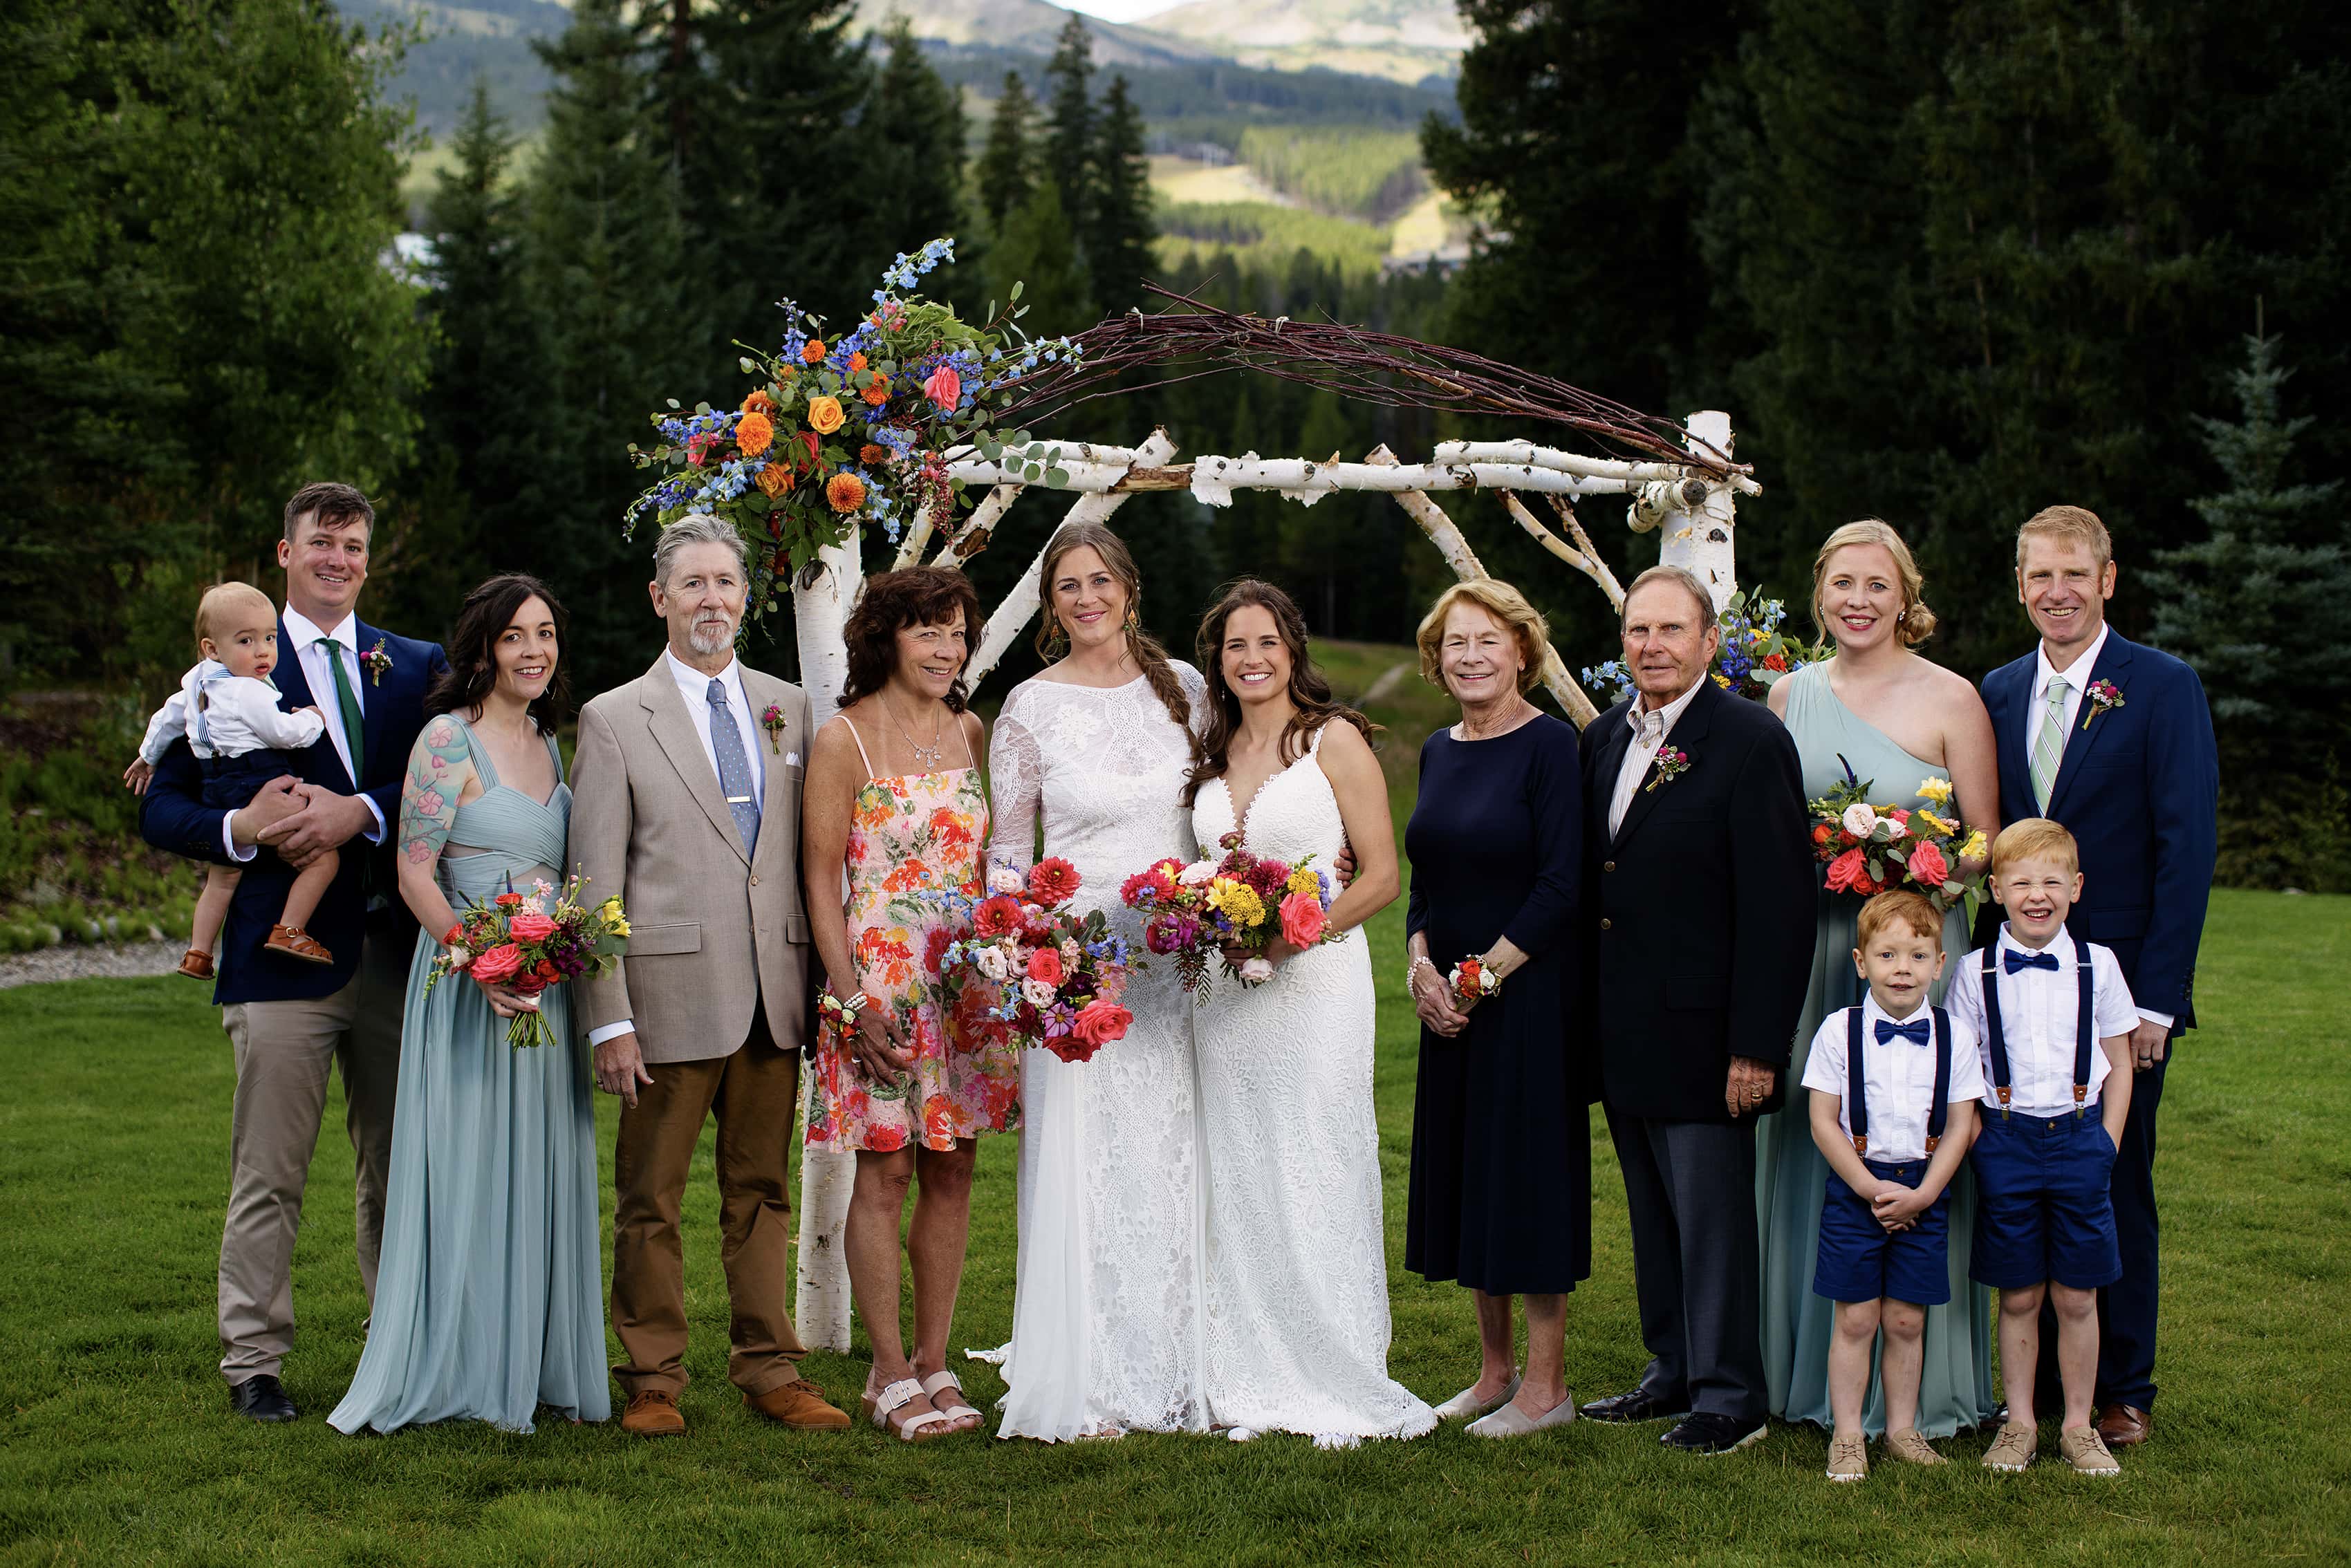 Family wedding photo for a lesbian couple in Colorado